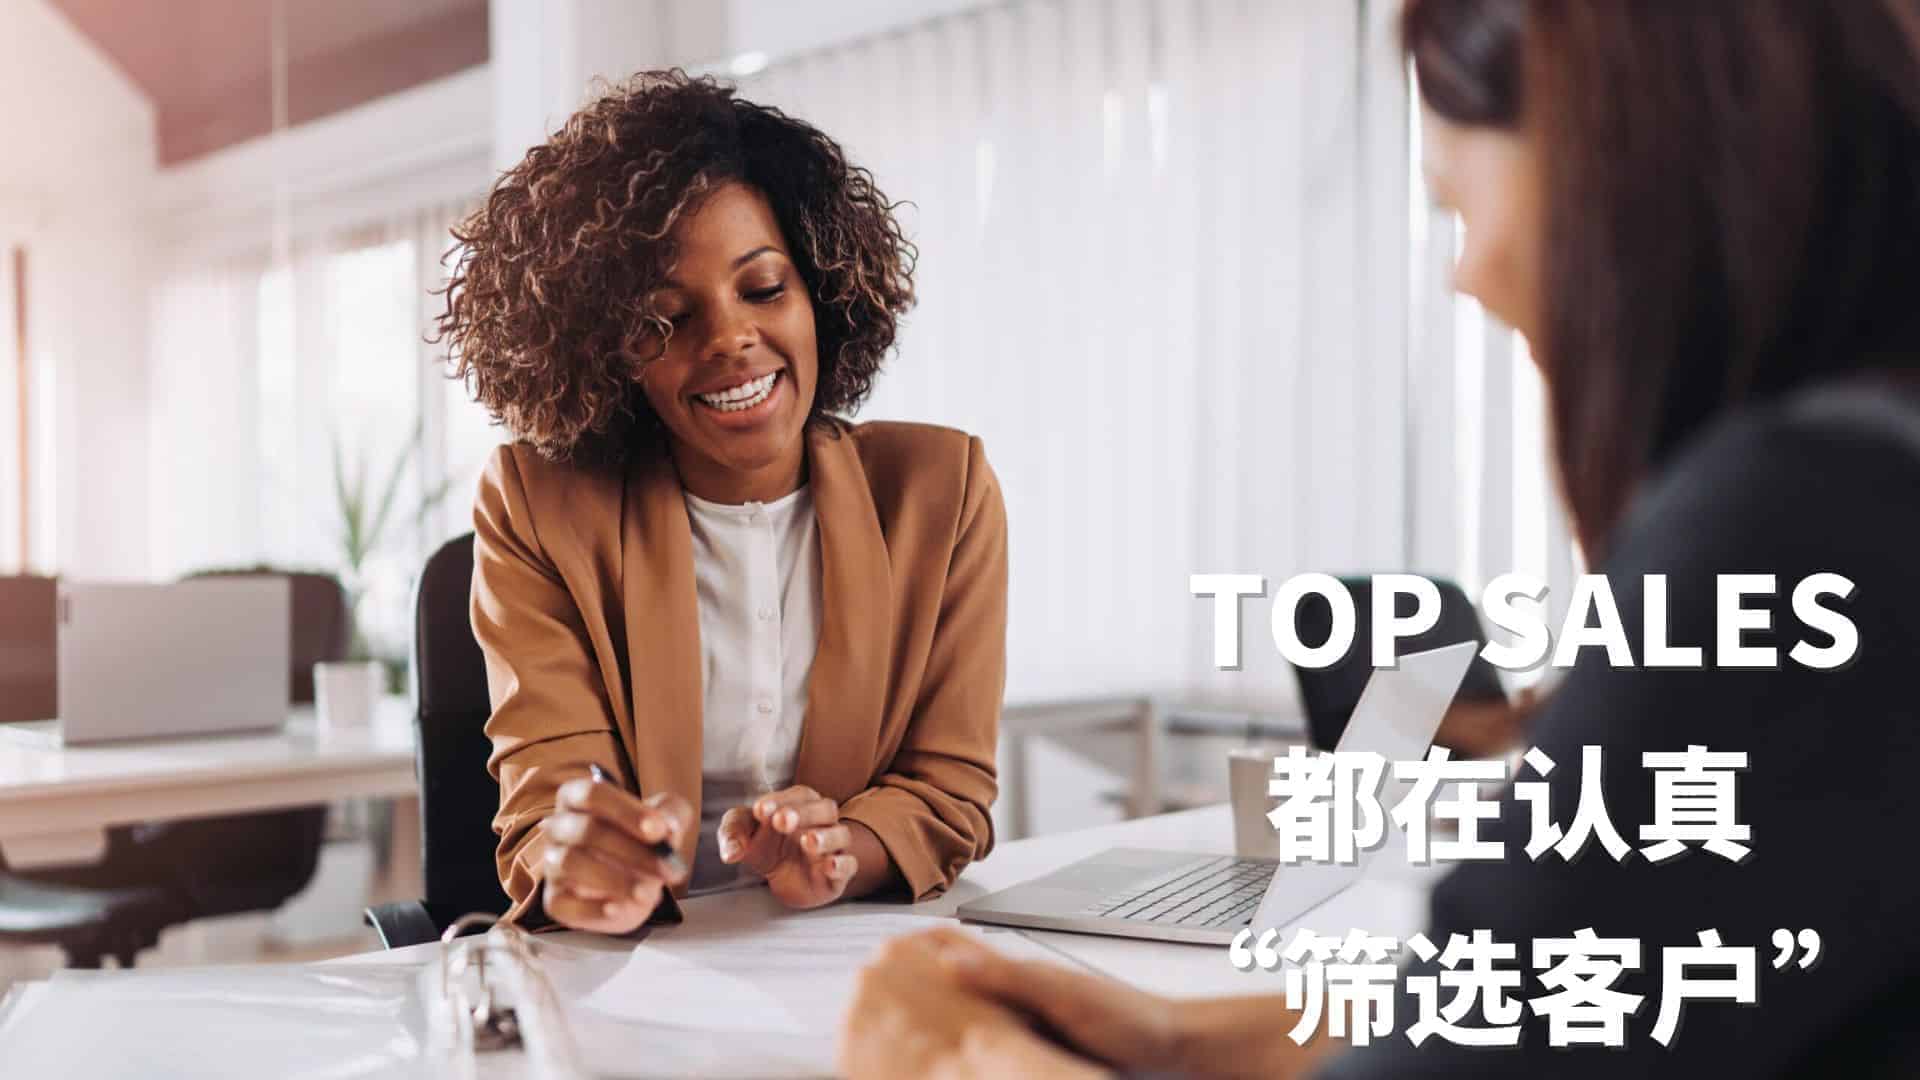 Read more about the article TOP SALES都在认真 “筛选客户”